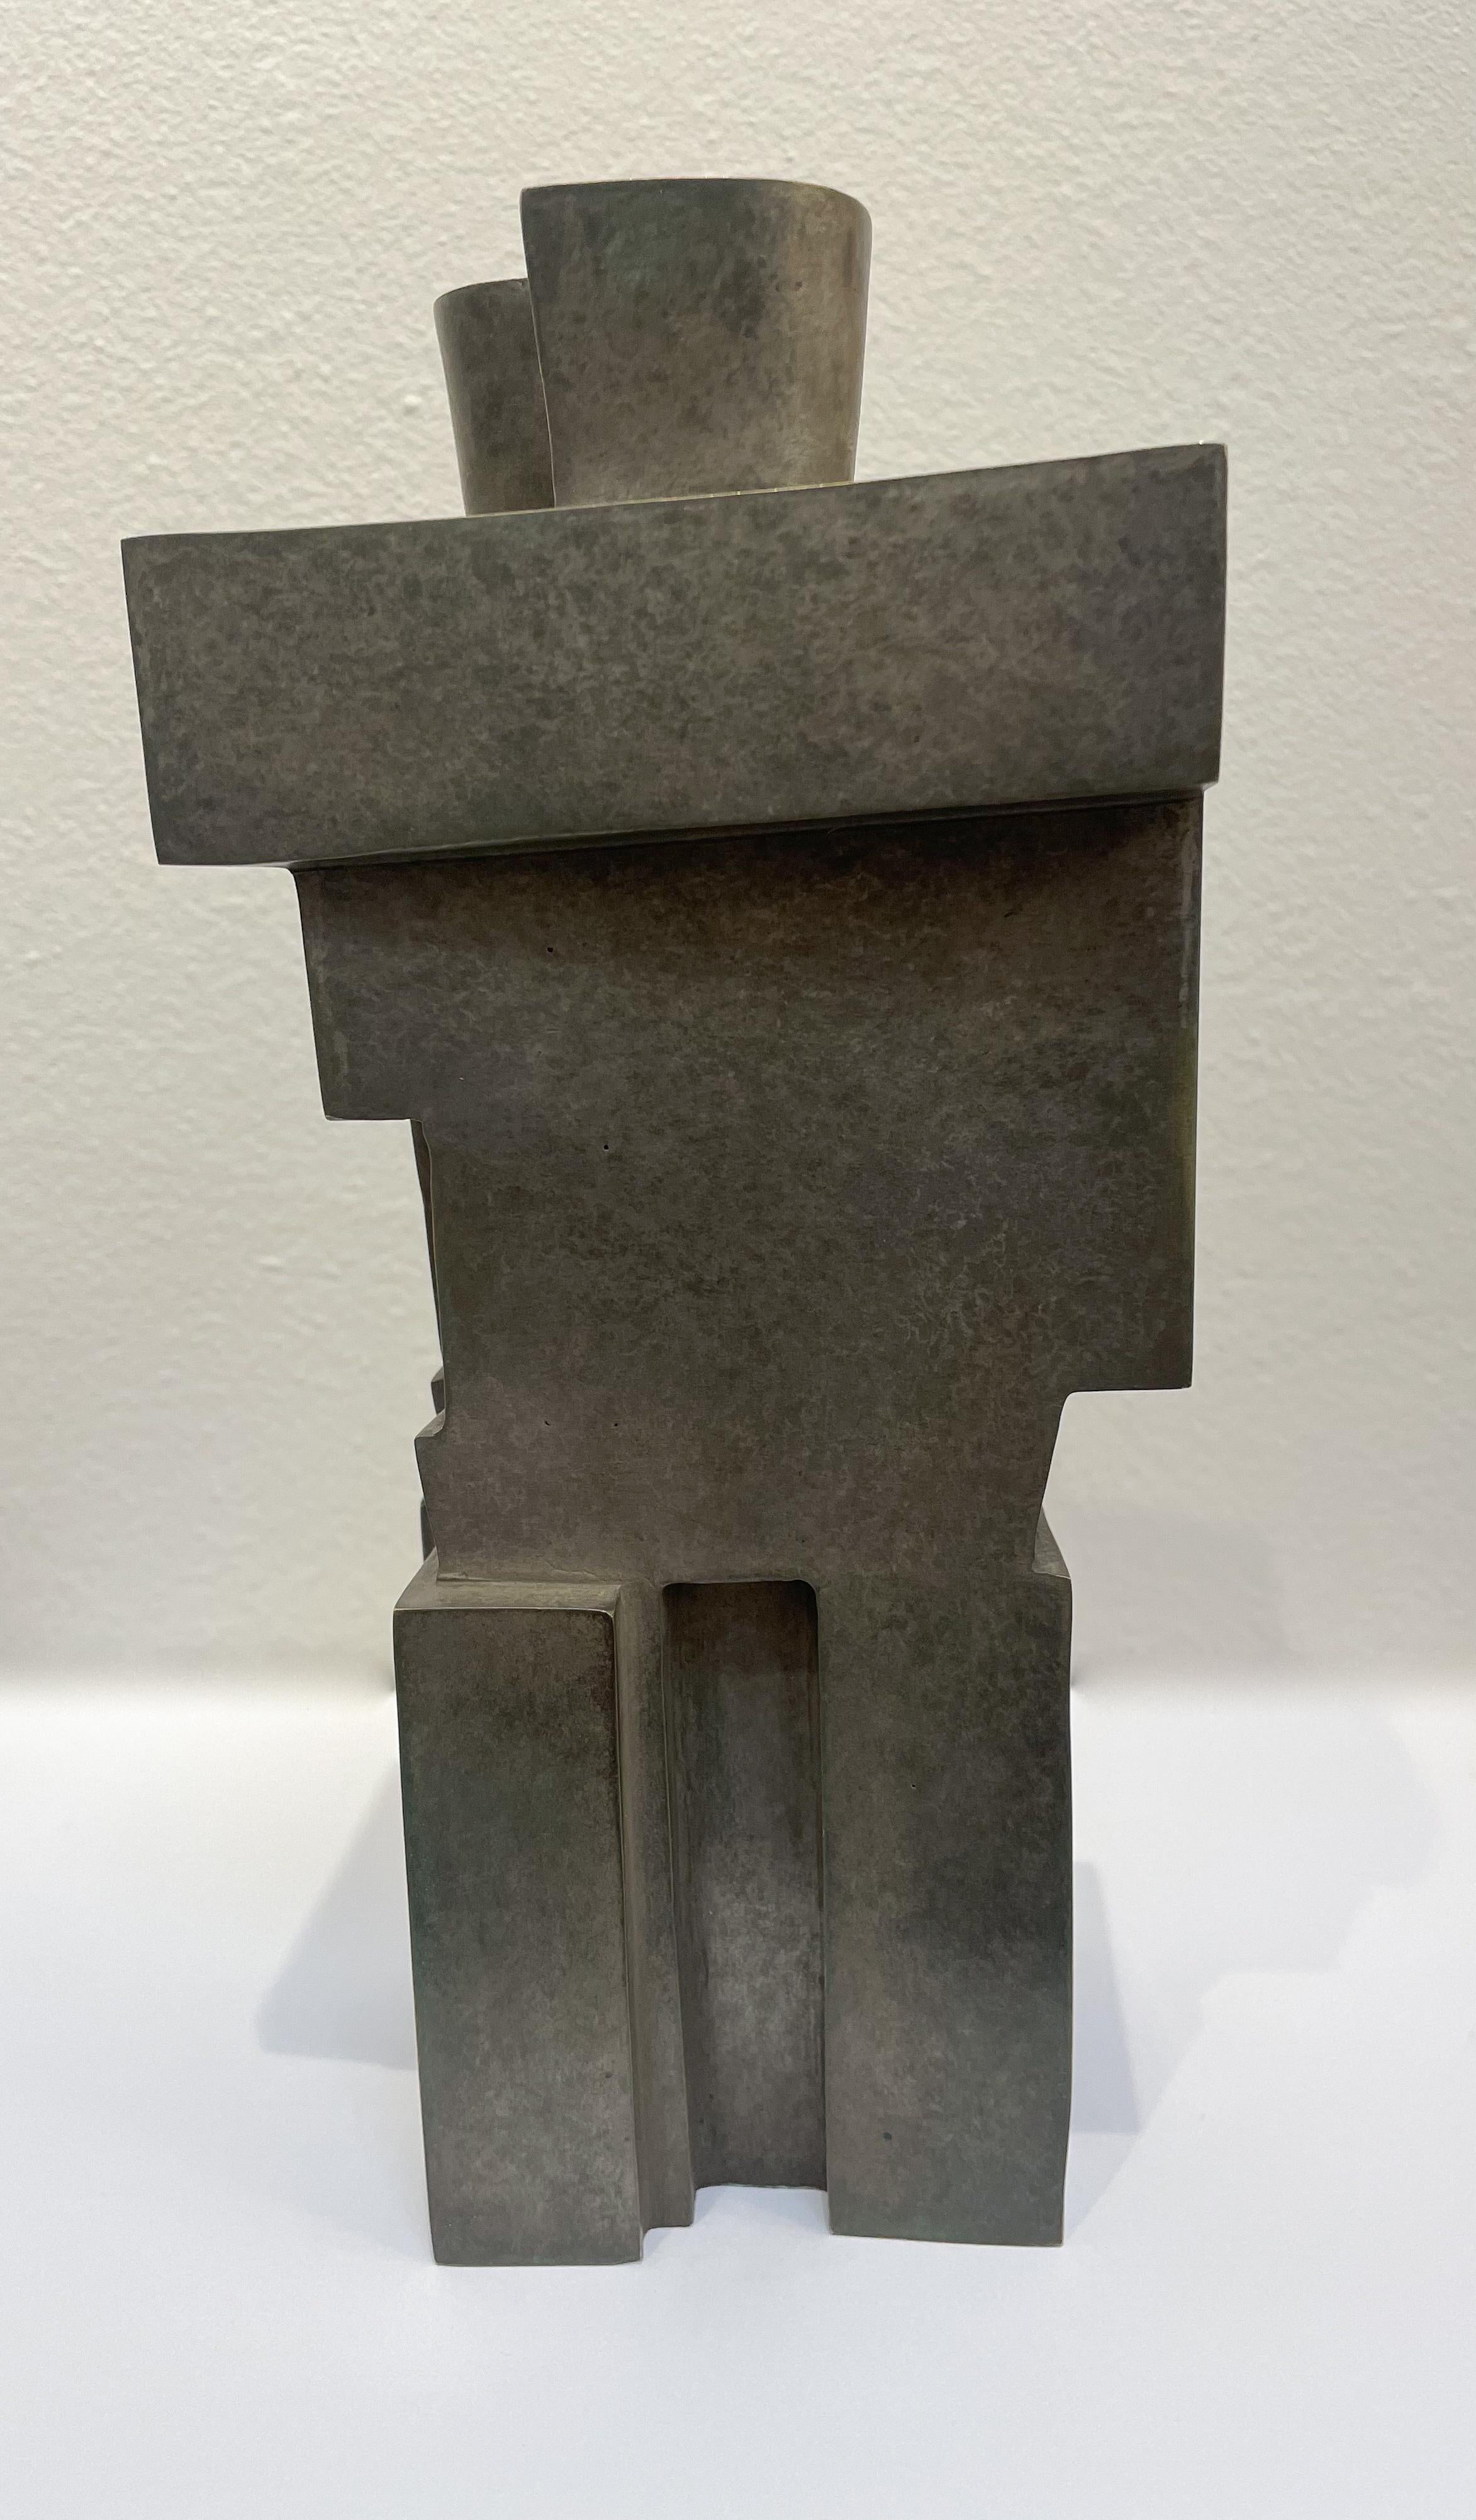 Art Deco Cubist Bronze Sculpture 'The Twins' by Willy Kessels, 1920s For Sale